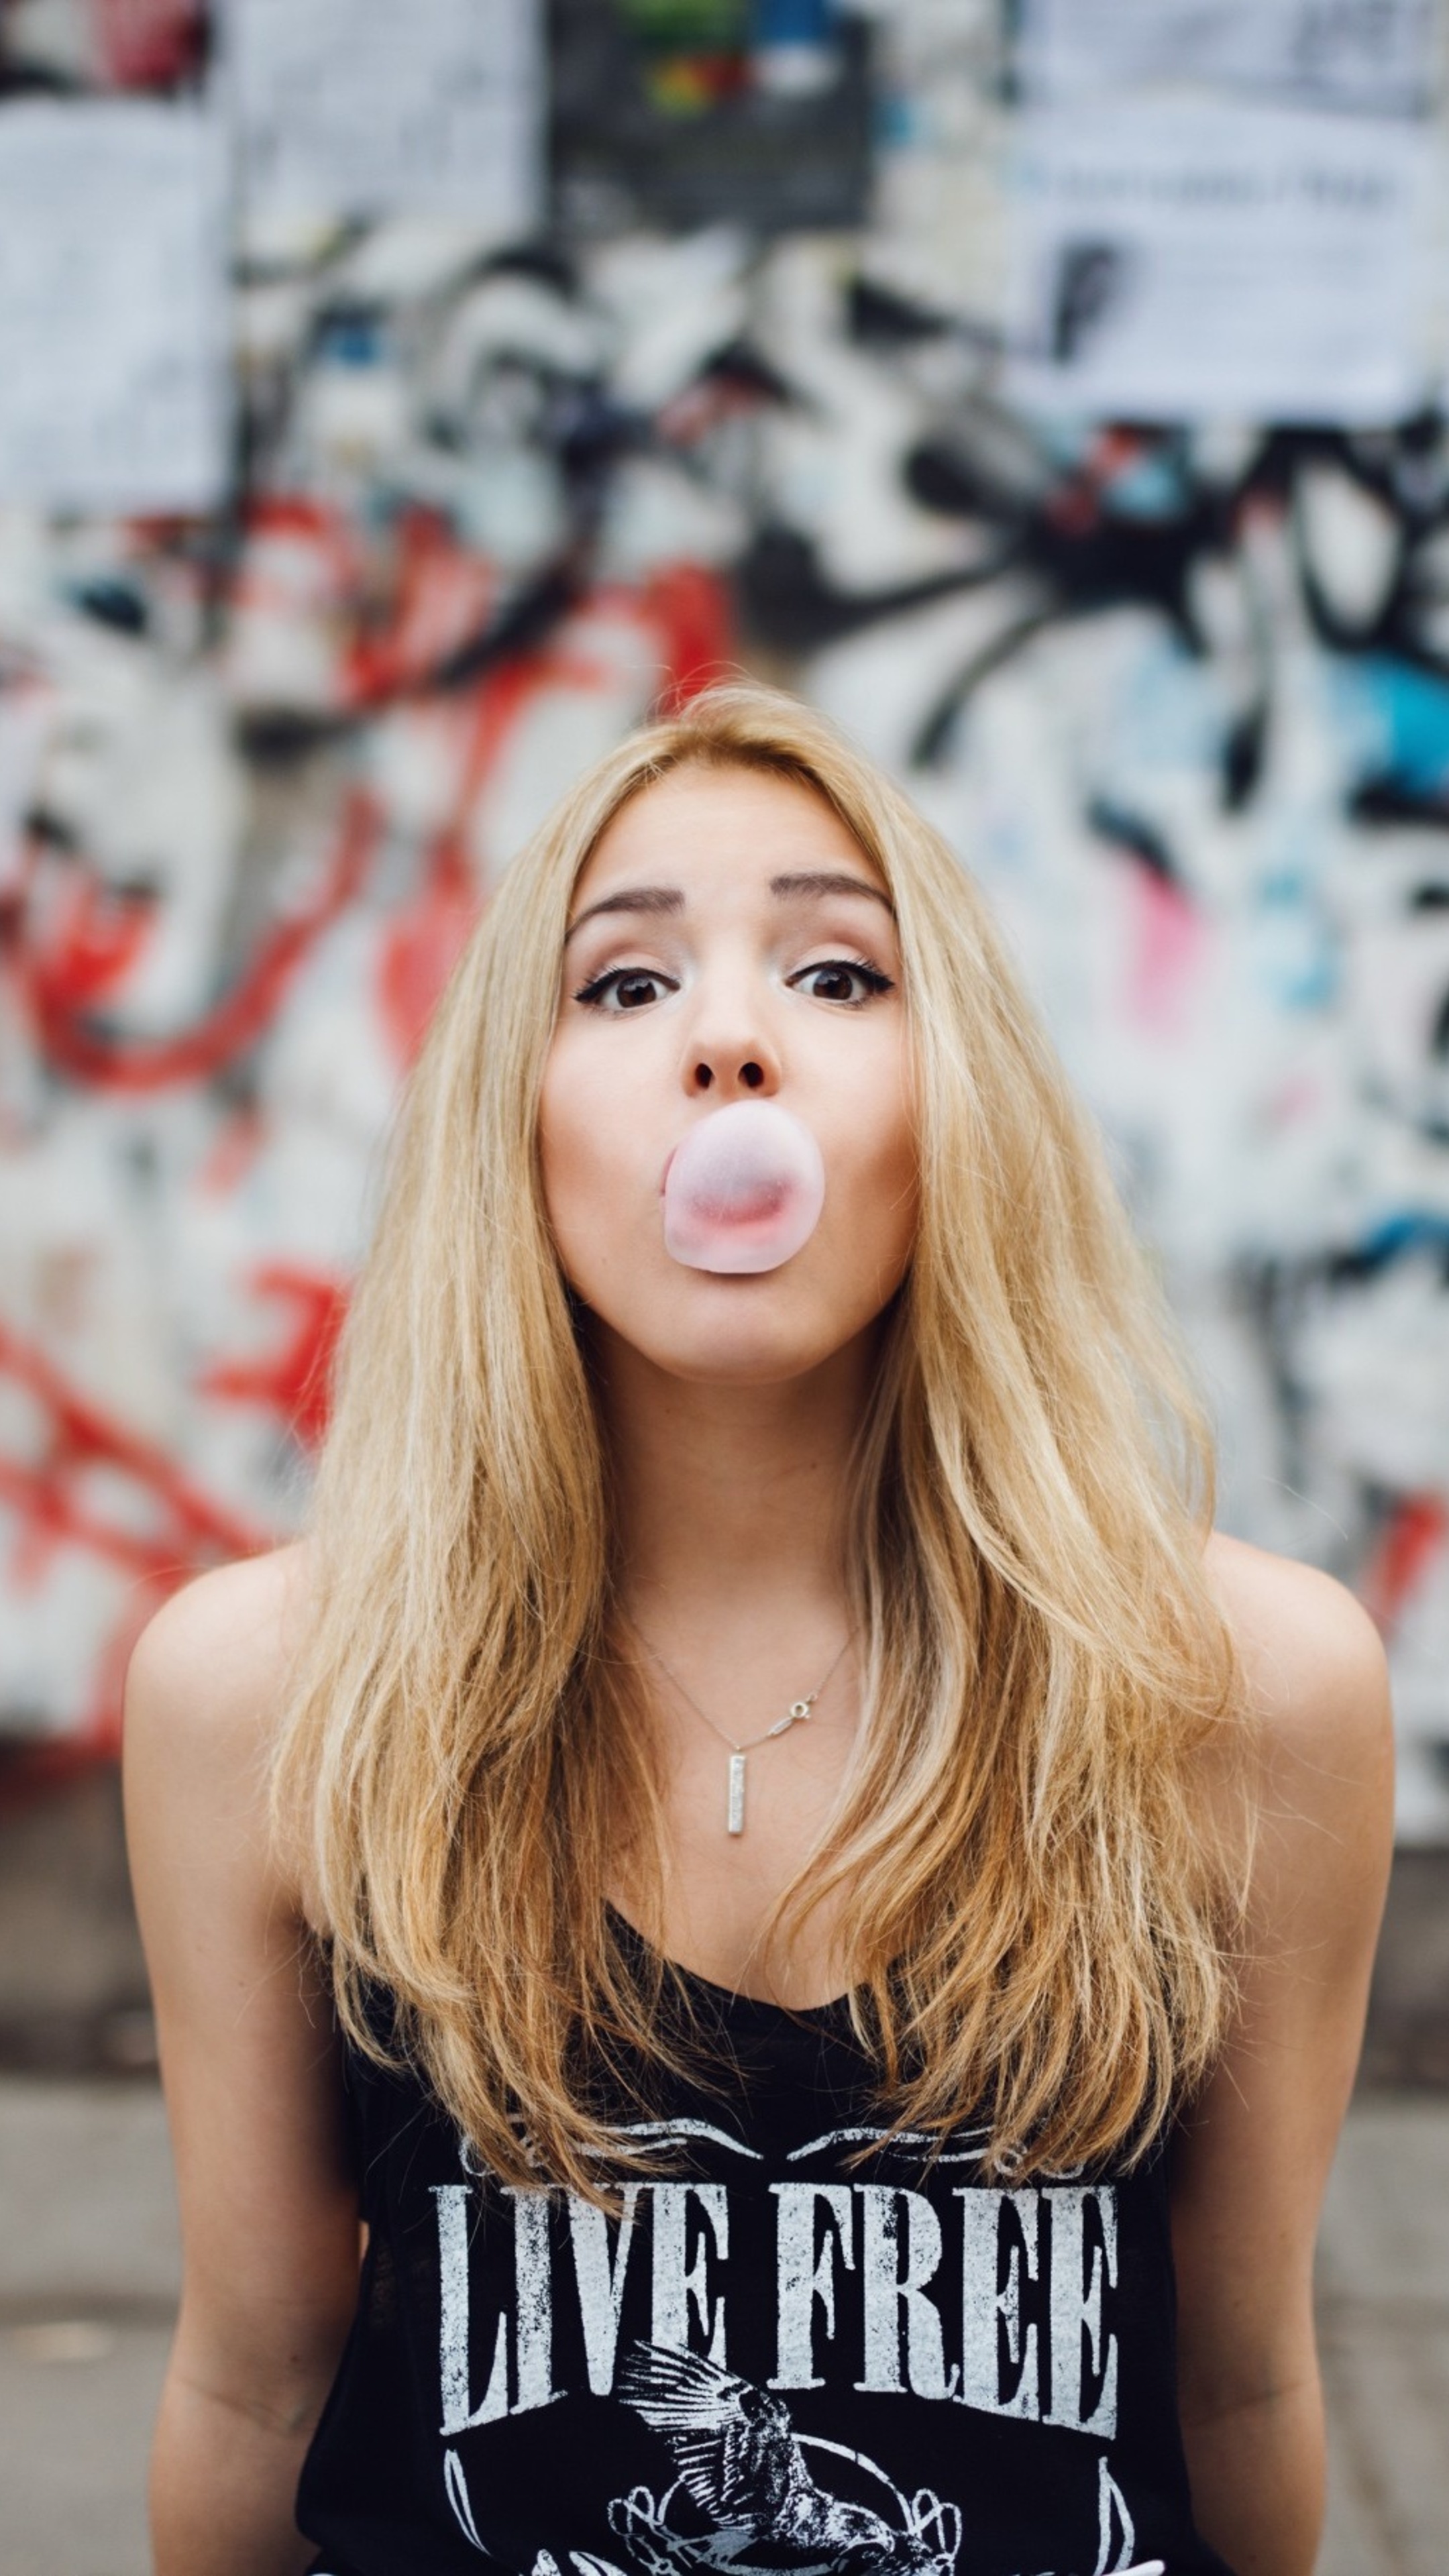 Girl blowing bubble gum, Playful and carefree, Bubble-blowing joy, Photo-worthy moment, 2160x3840 4K Phone